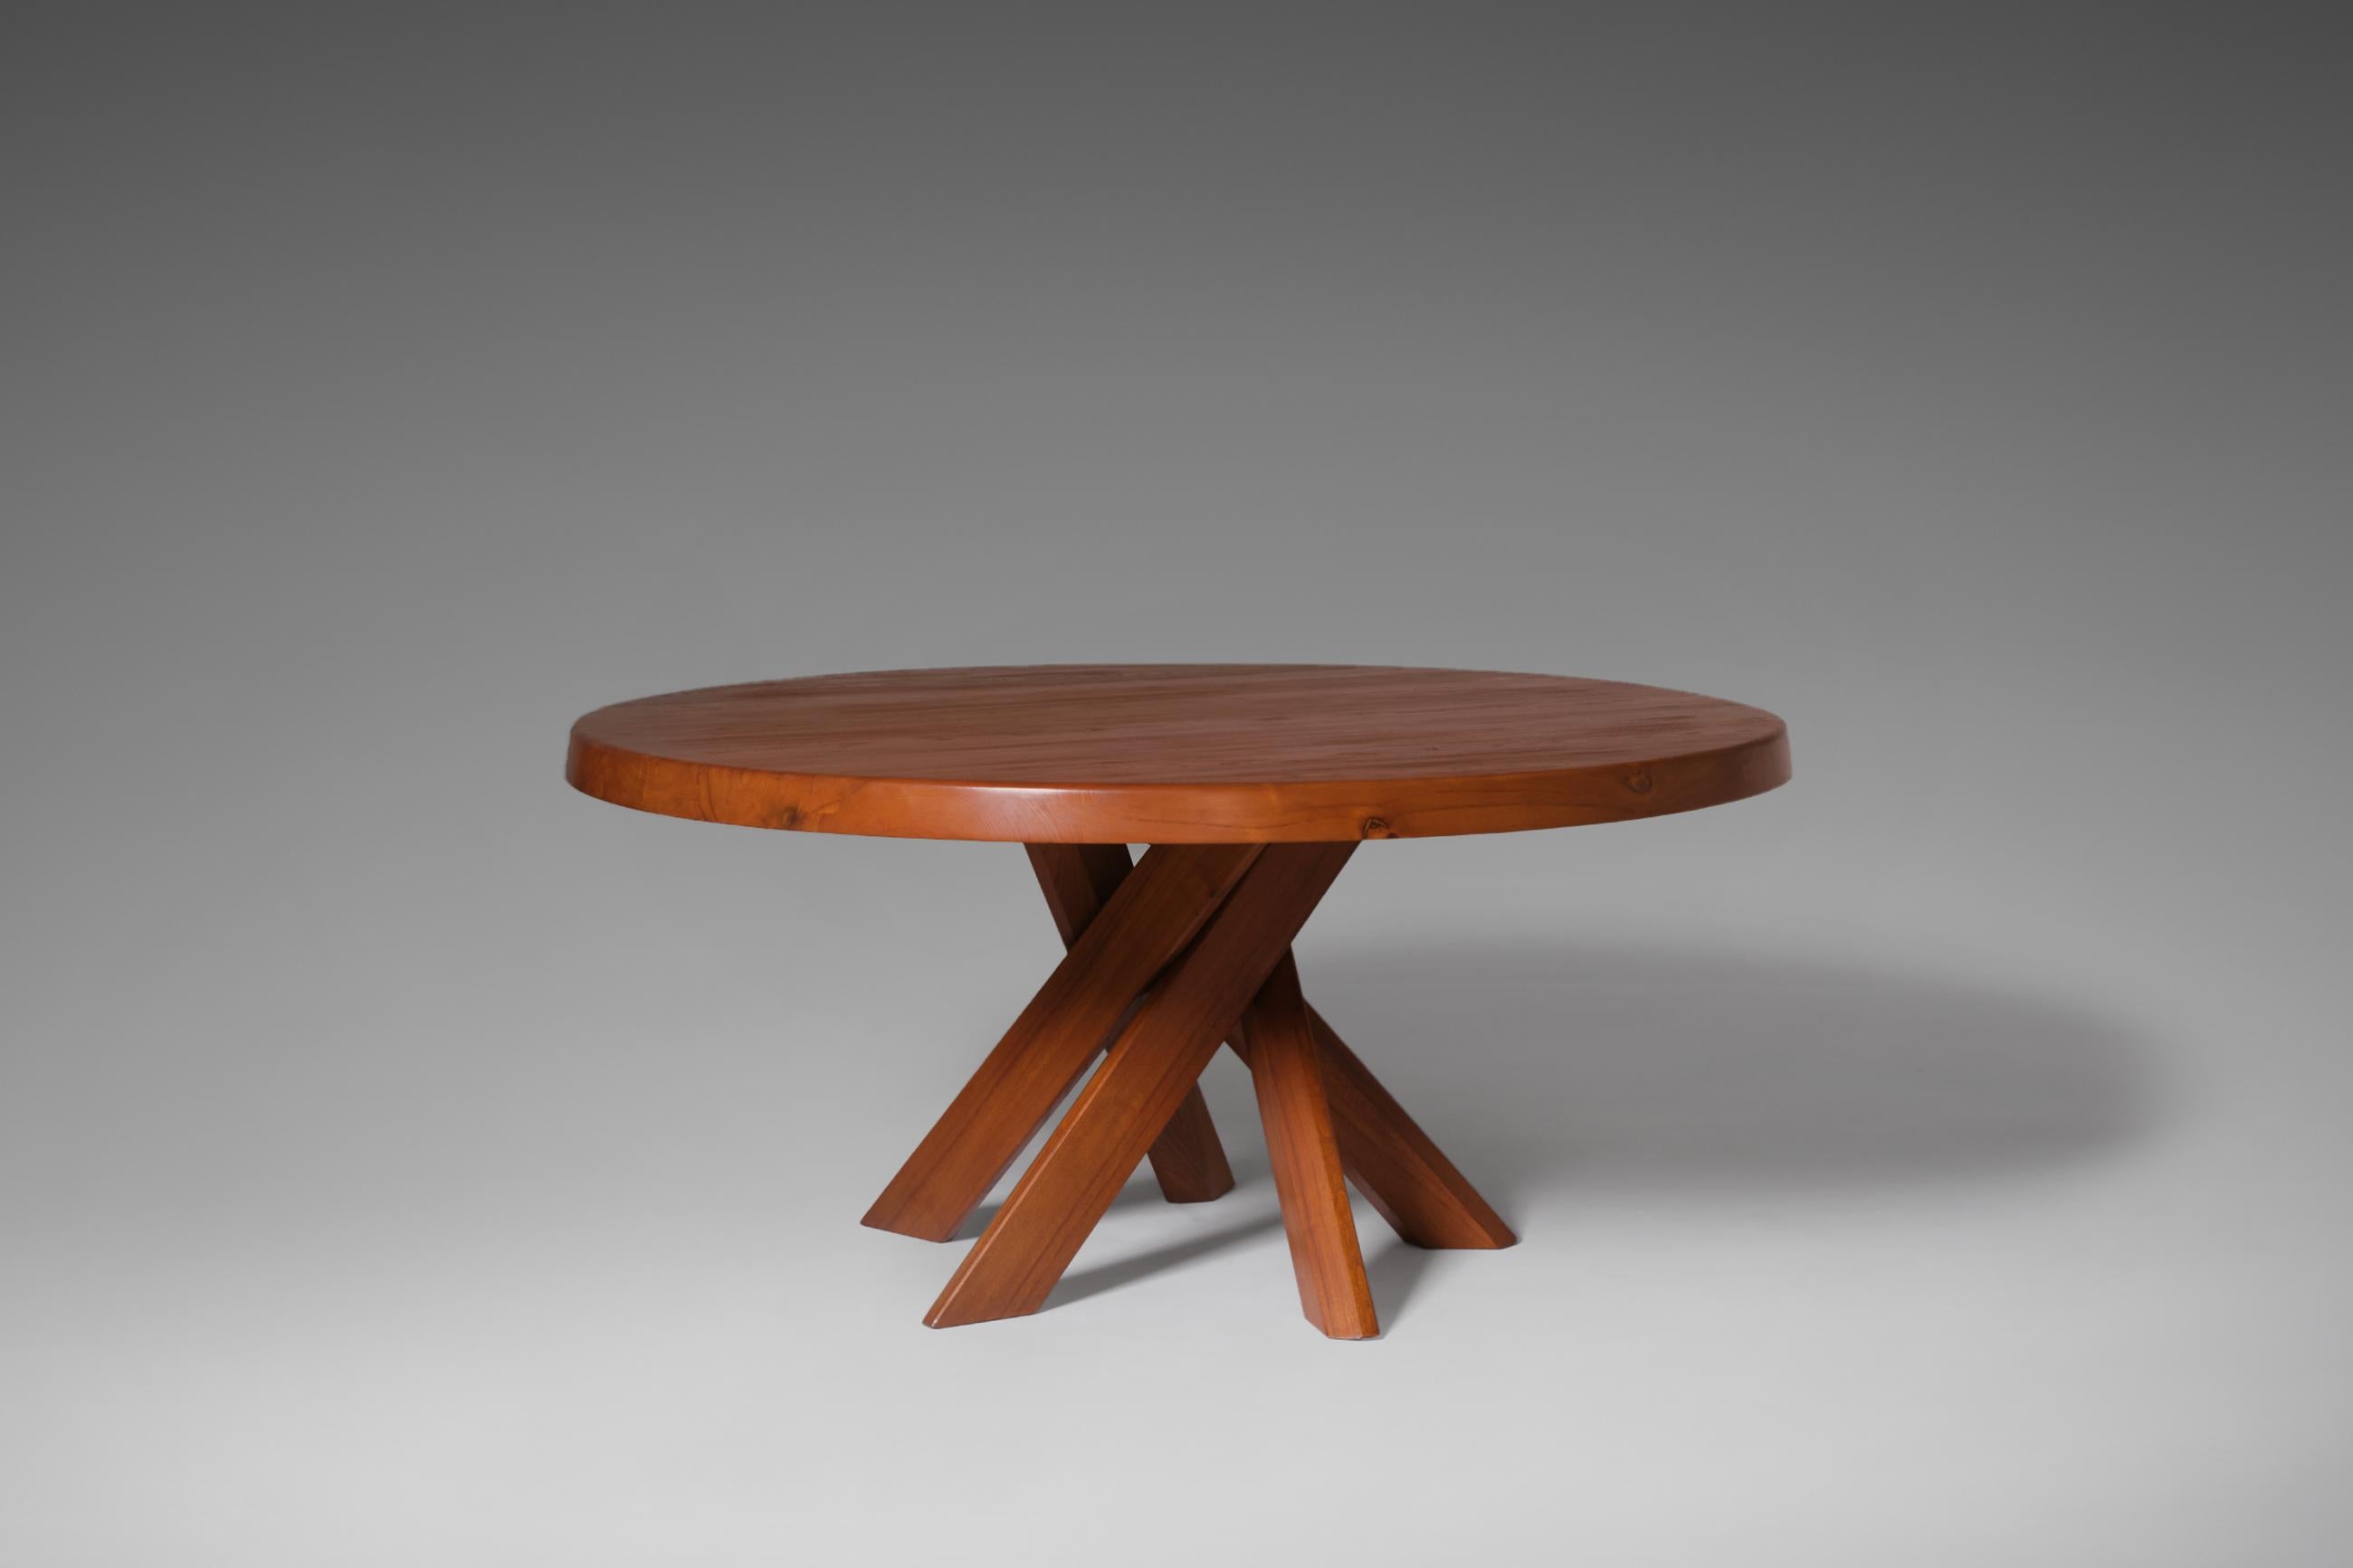 Rare XL round dining table mod. ‘T21E SFAX' in Solid elm by Pierre Chapo, France, 1960's. Remarkable design made of solid elmwood with a beautiful exposed grain, giving the table a rich, warm and natural appearance. The sculptural base composed of 5